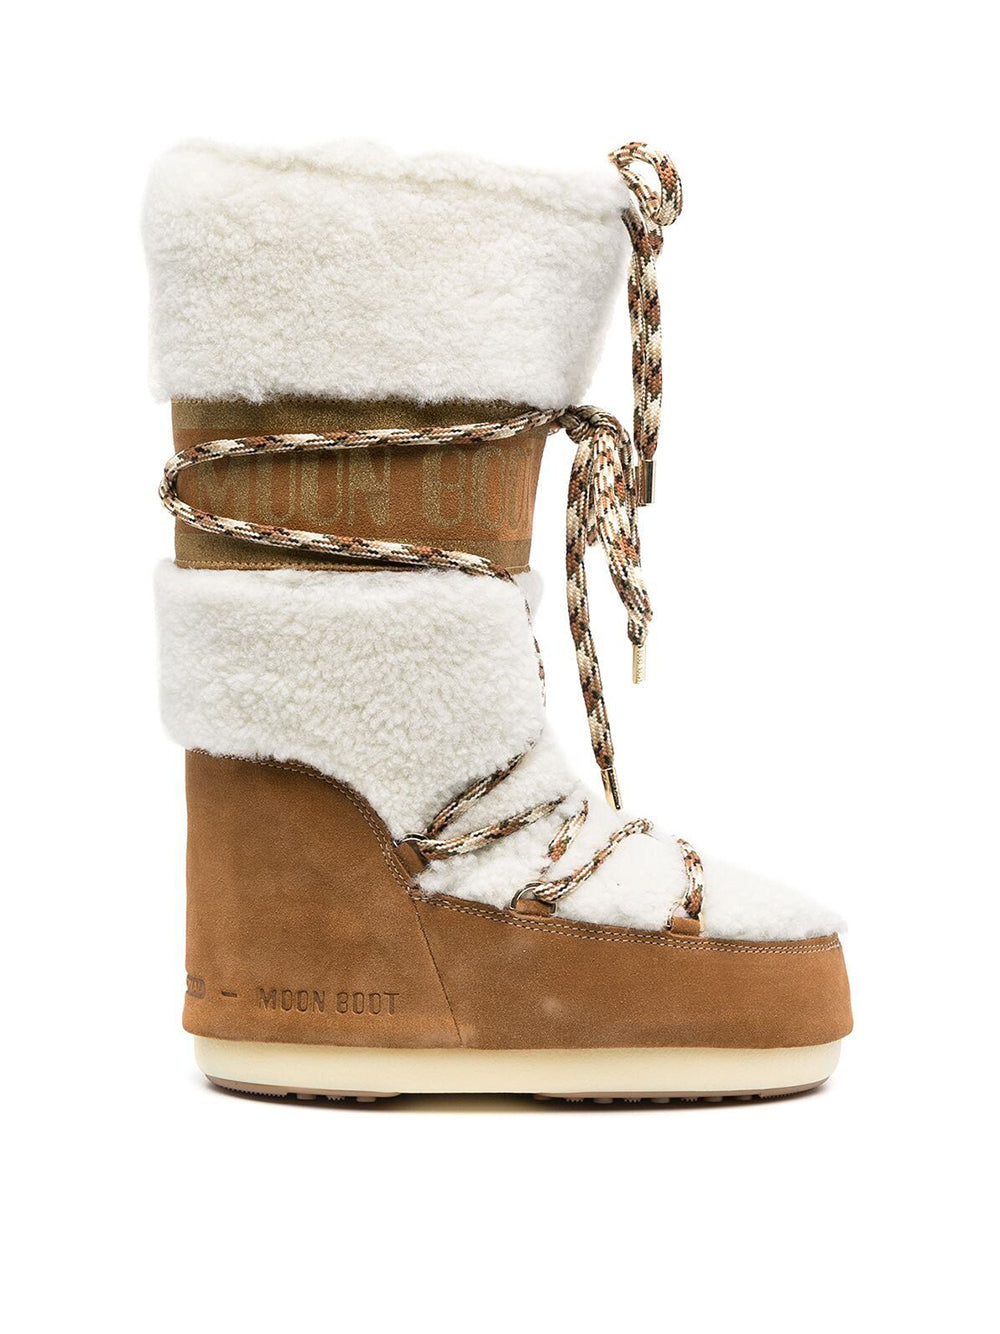 Icon shearling boot